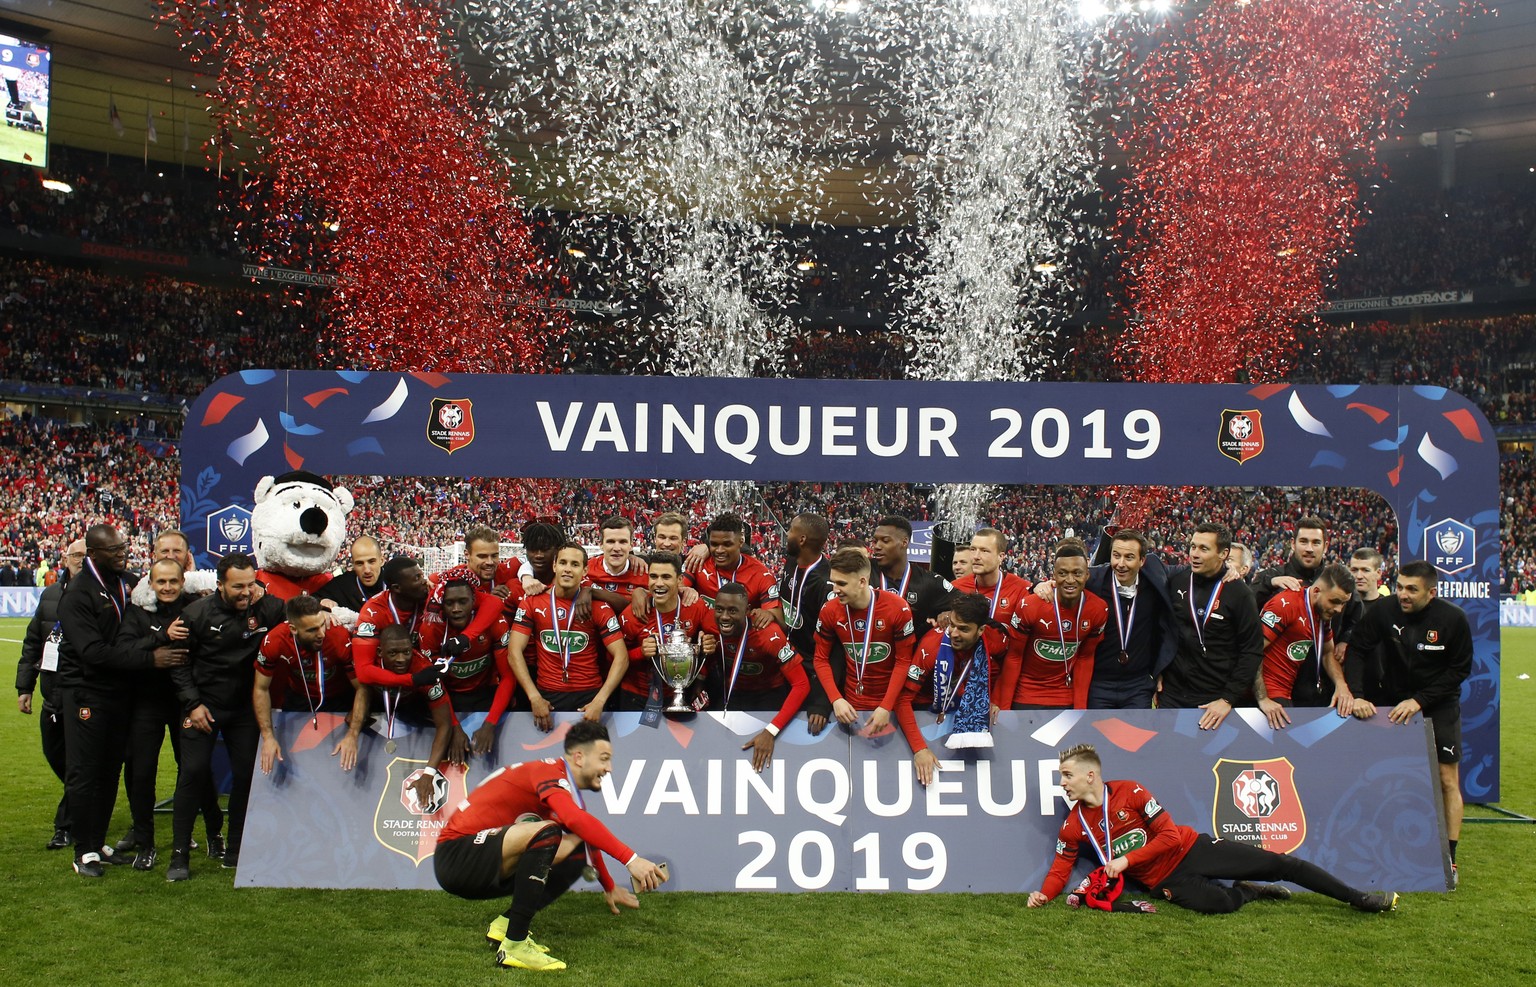 Team of Rennes celebrate with trophy after winning the French Cup soccer final between Rennes and Paris Saint Germain at the Stade de France stadium in Saint-Denis, outside Paris, France, Saturday, Ap ...